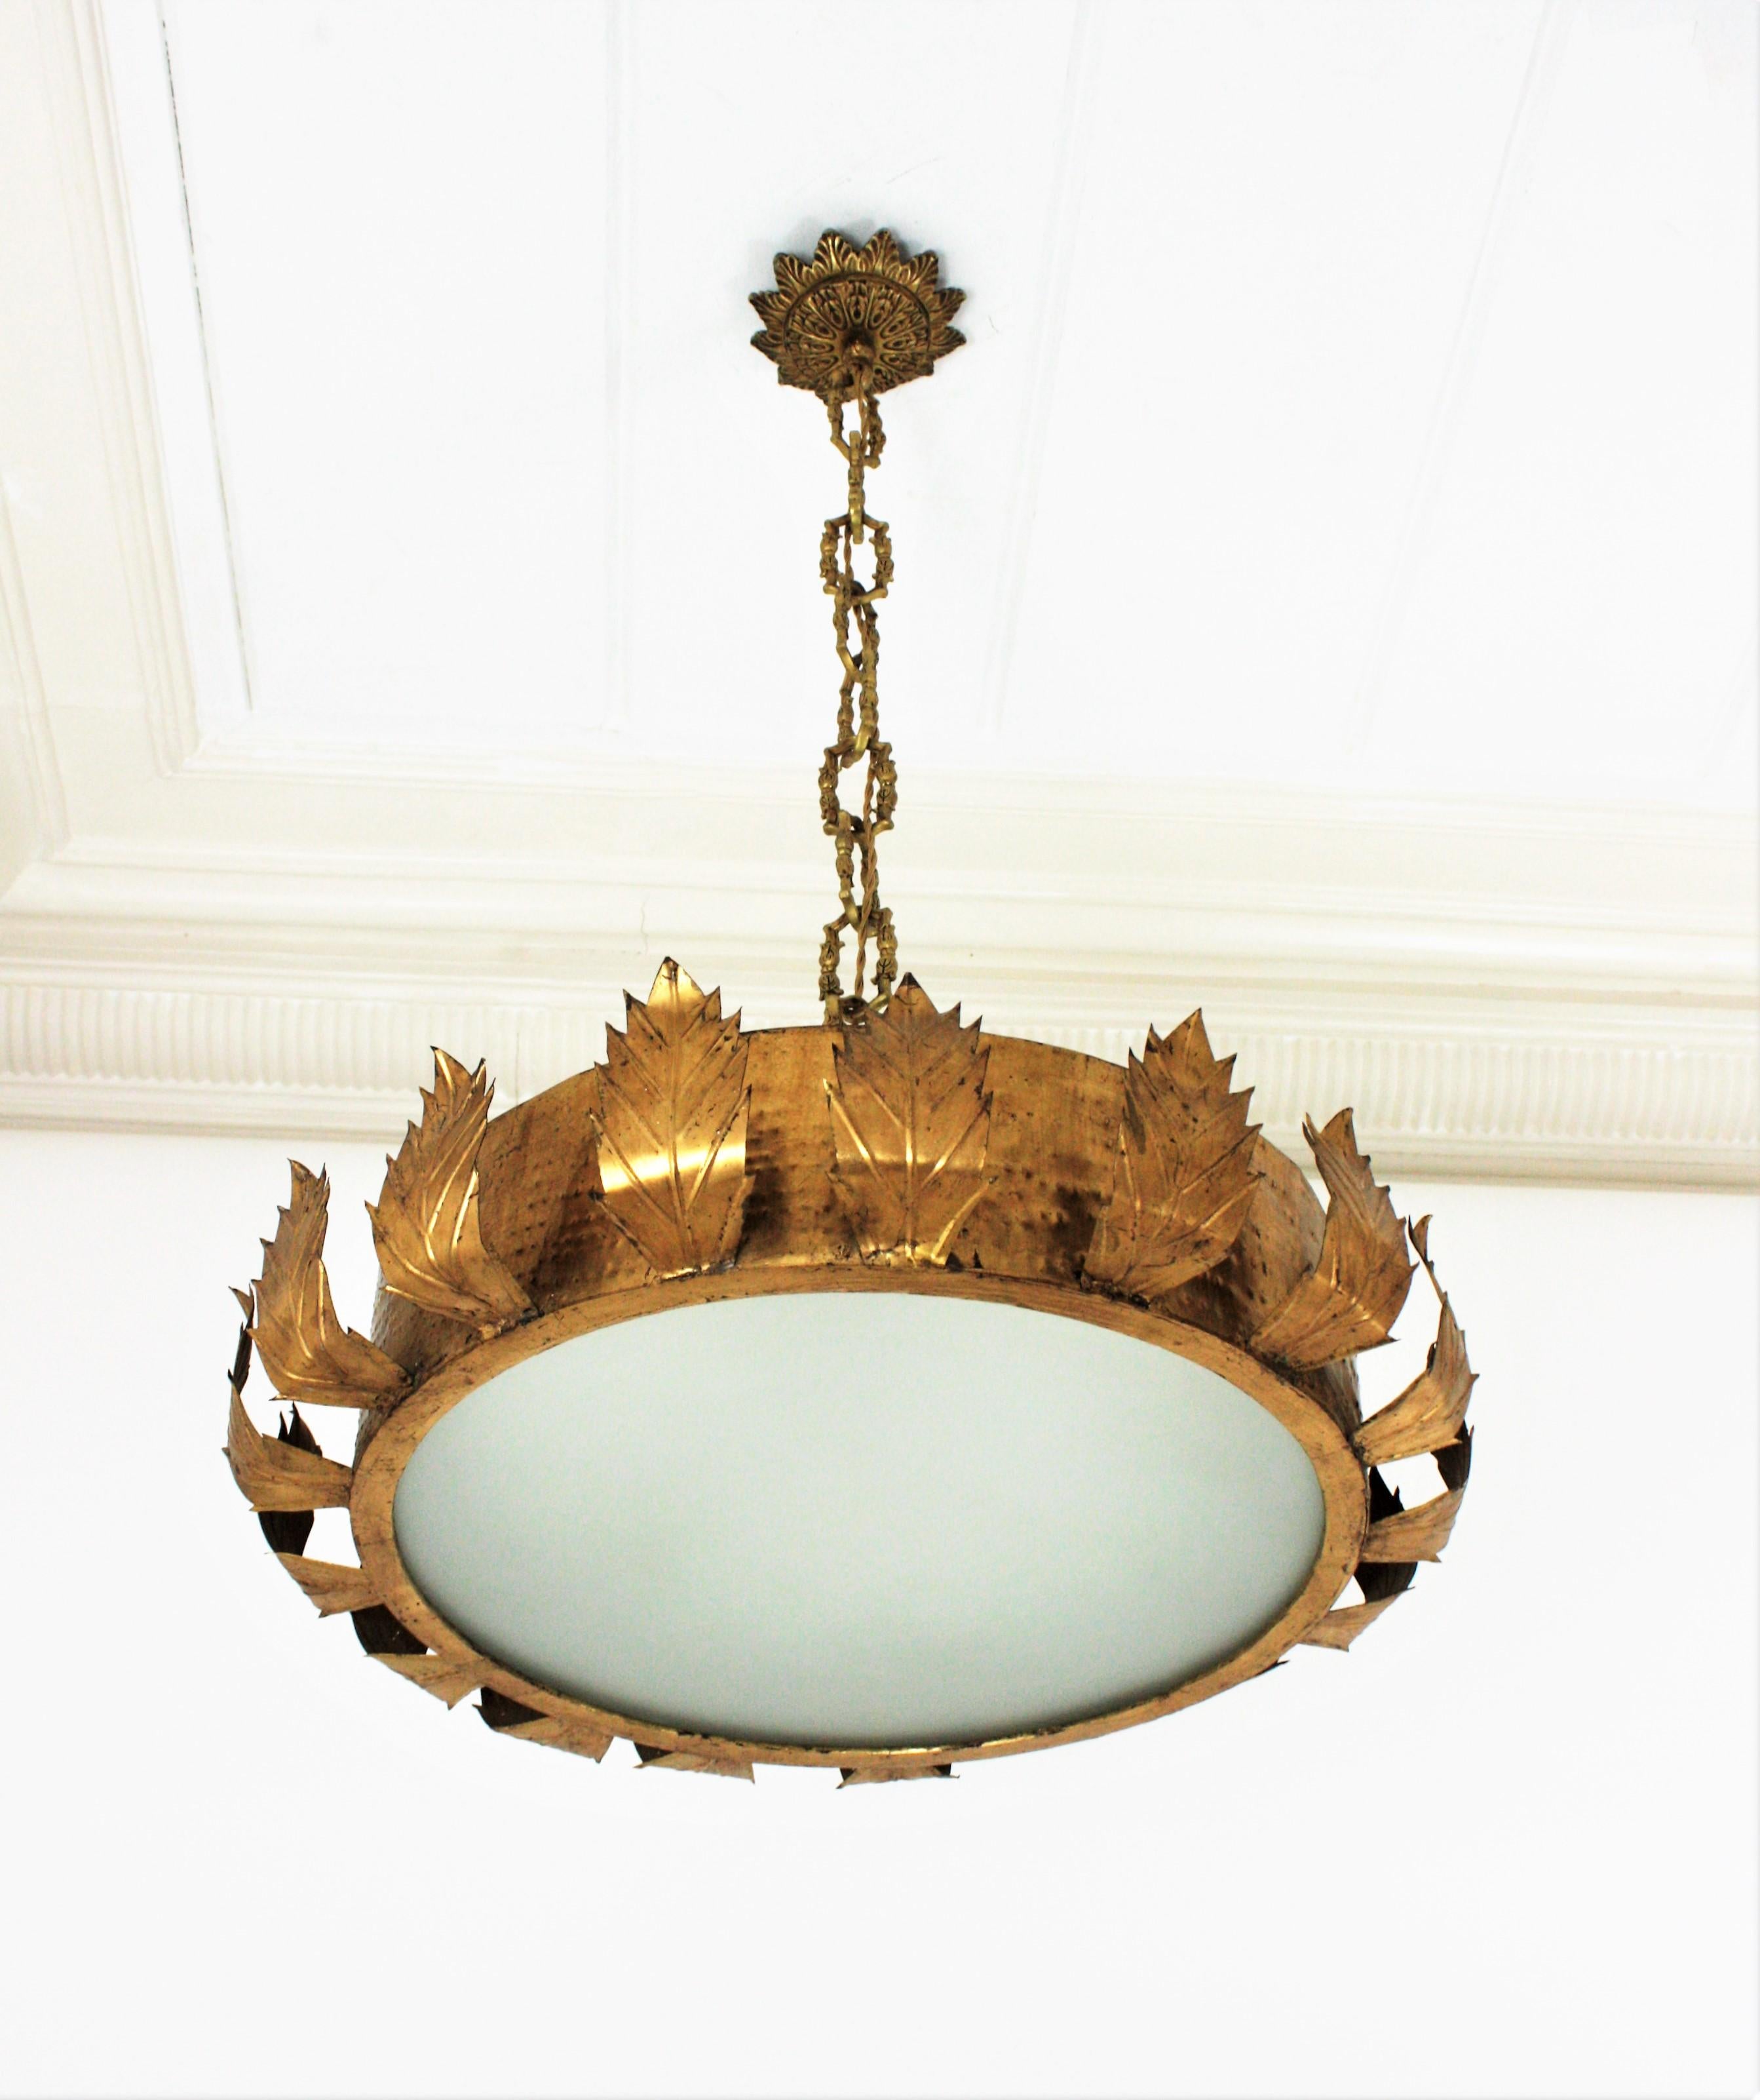 Gilt iron and bronze sunburst crown shape chandelier or ceiling light fixture with frosted glass, Spain, 1950s.
This ceiling light was handcrafted in Spain at the Mid-Century Modern period in the style of Brutalism. The body of the light fixture is